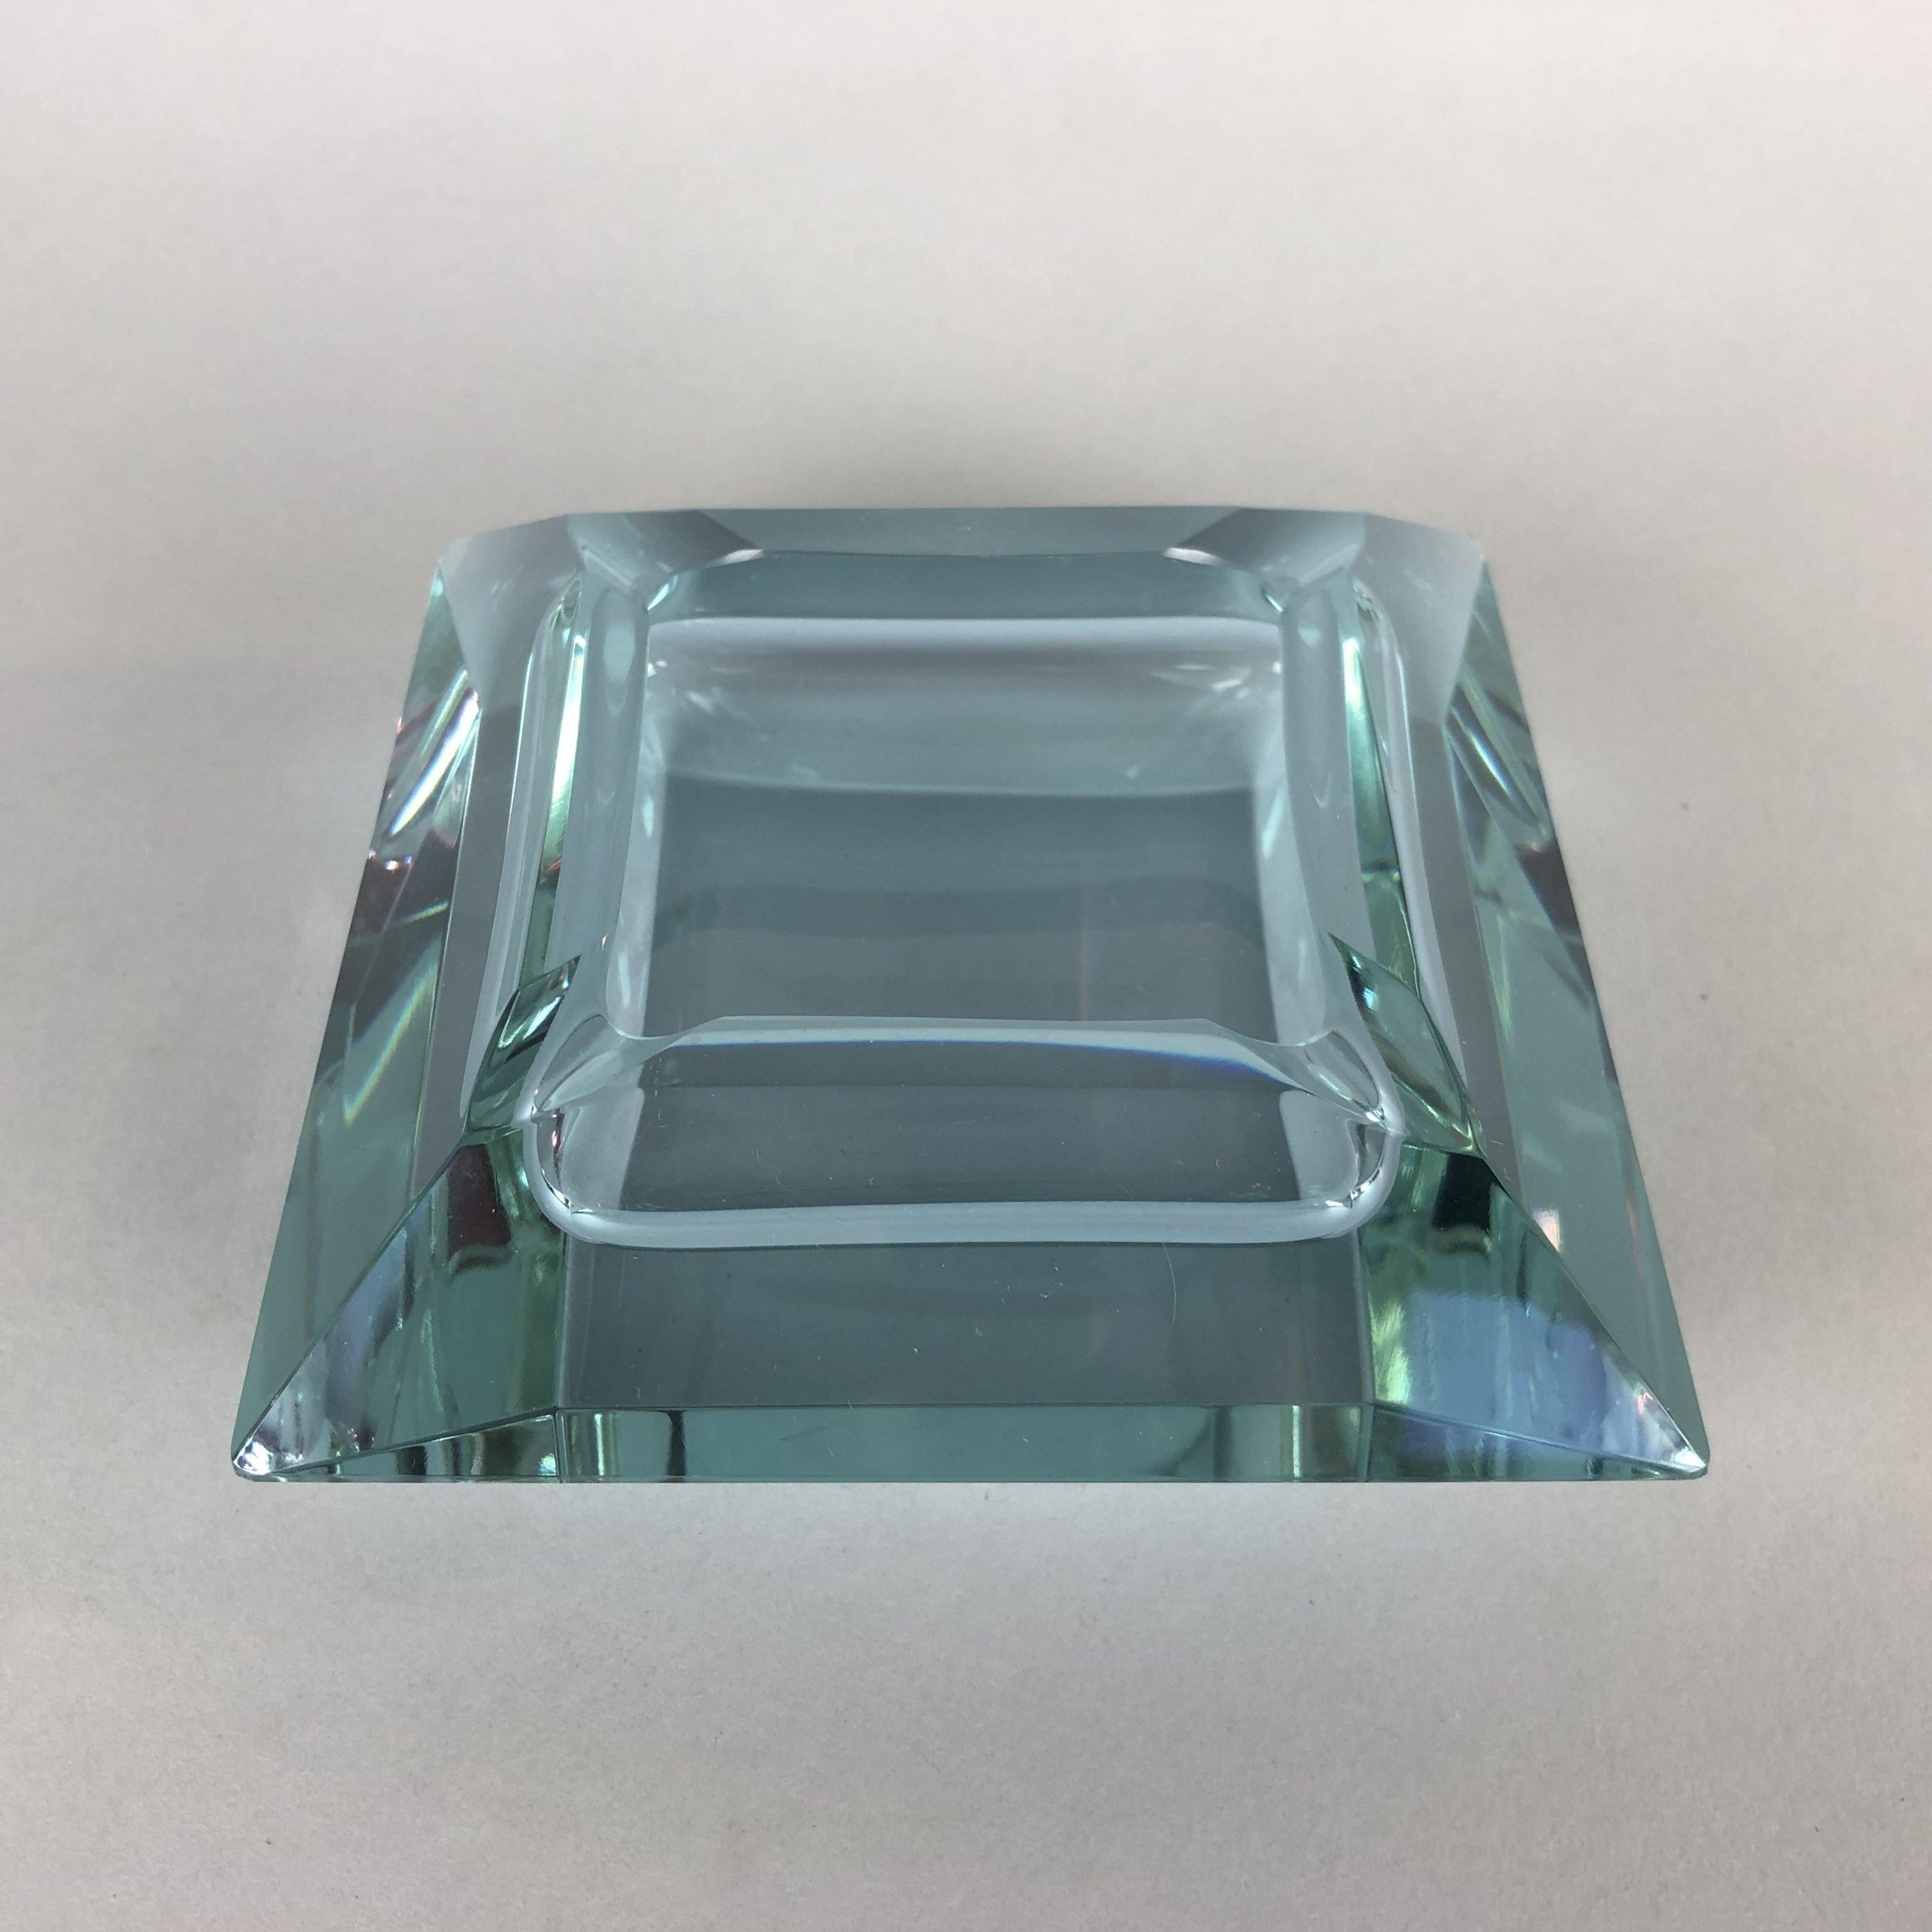 Art Deco ashtray made of neodymium glass (also known as Alexandrite glass). Beautifully shaped, changes colour depending on the light source.